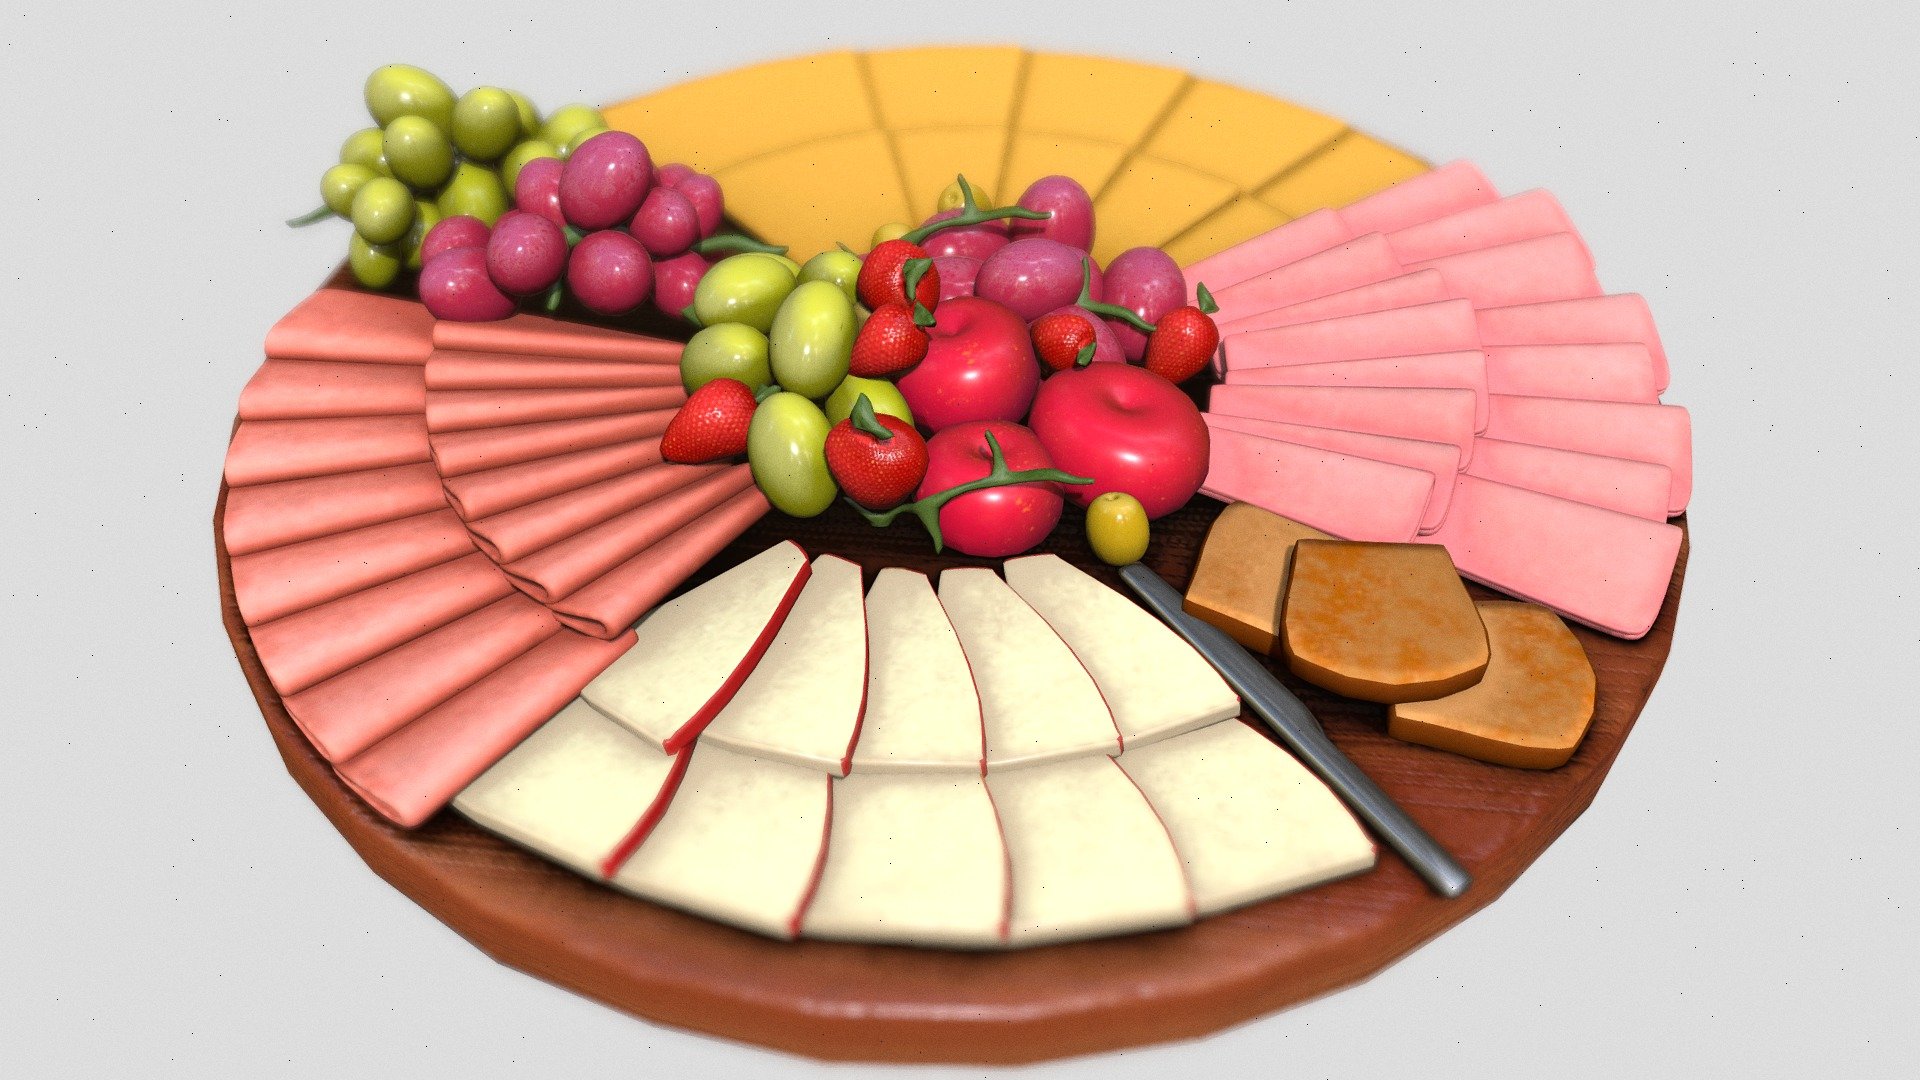 Simple appetizer board containing cheese, ham, apple slices, strawberry, plum, grape and olives.

Modeled in Blender.
Textured in Substance.

Baked single texture file version included.

Blender file included.

All base texture files included 3d model